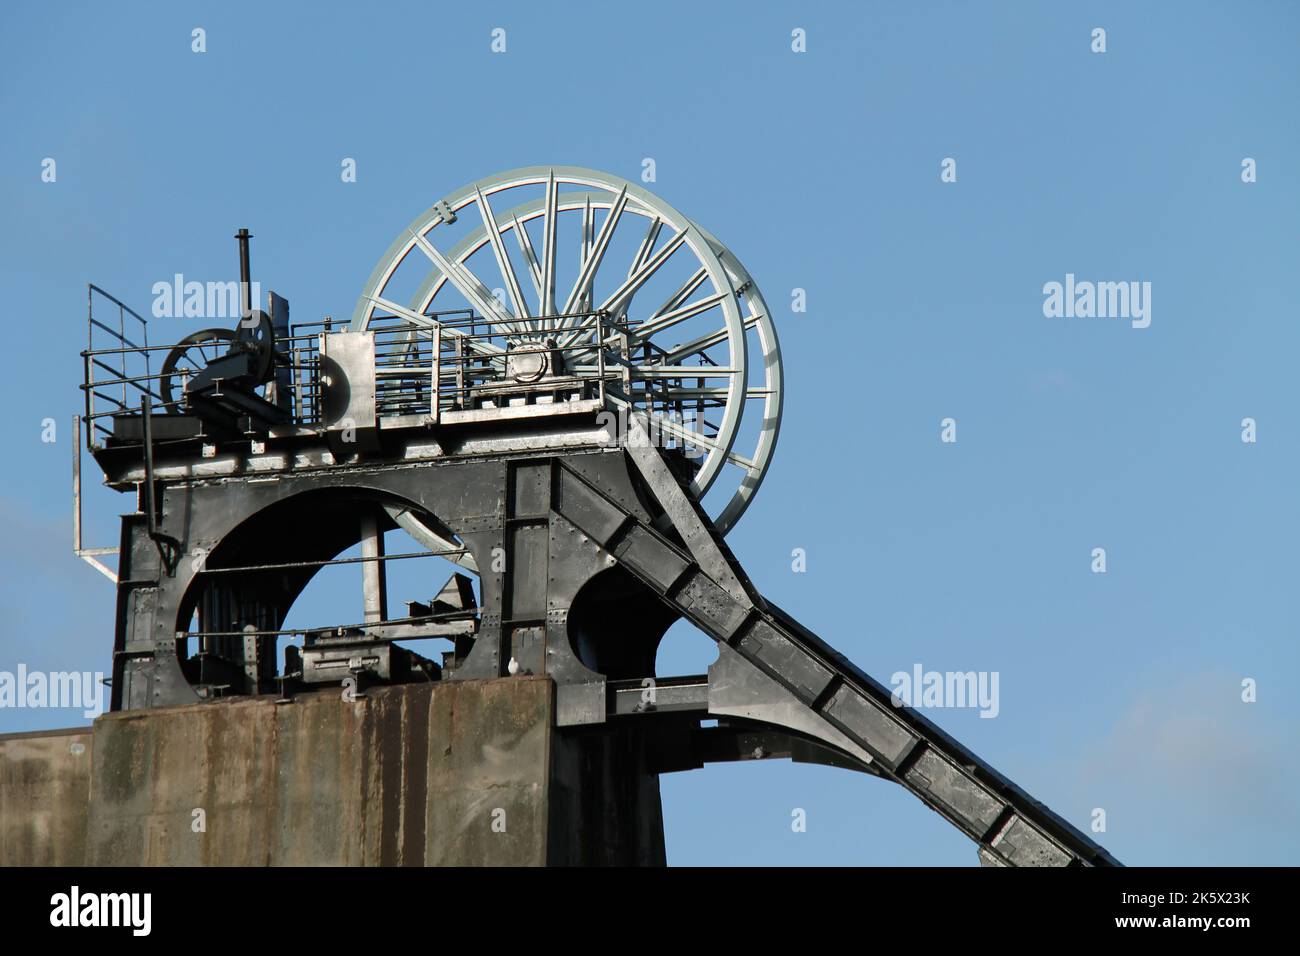 The Winding Wheels of a Disused Coal Mine. Stock Photo